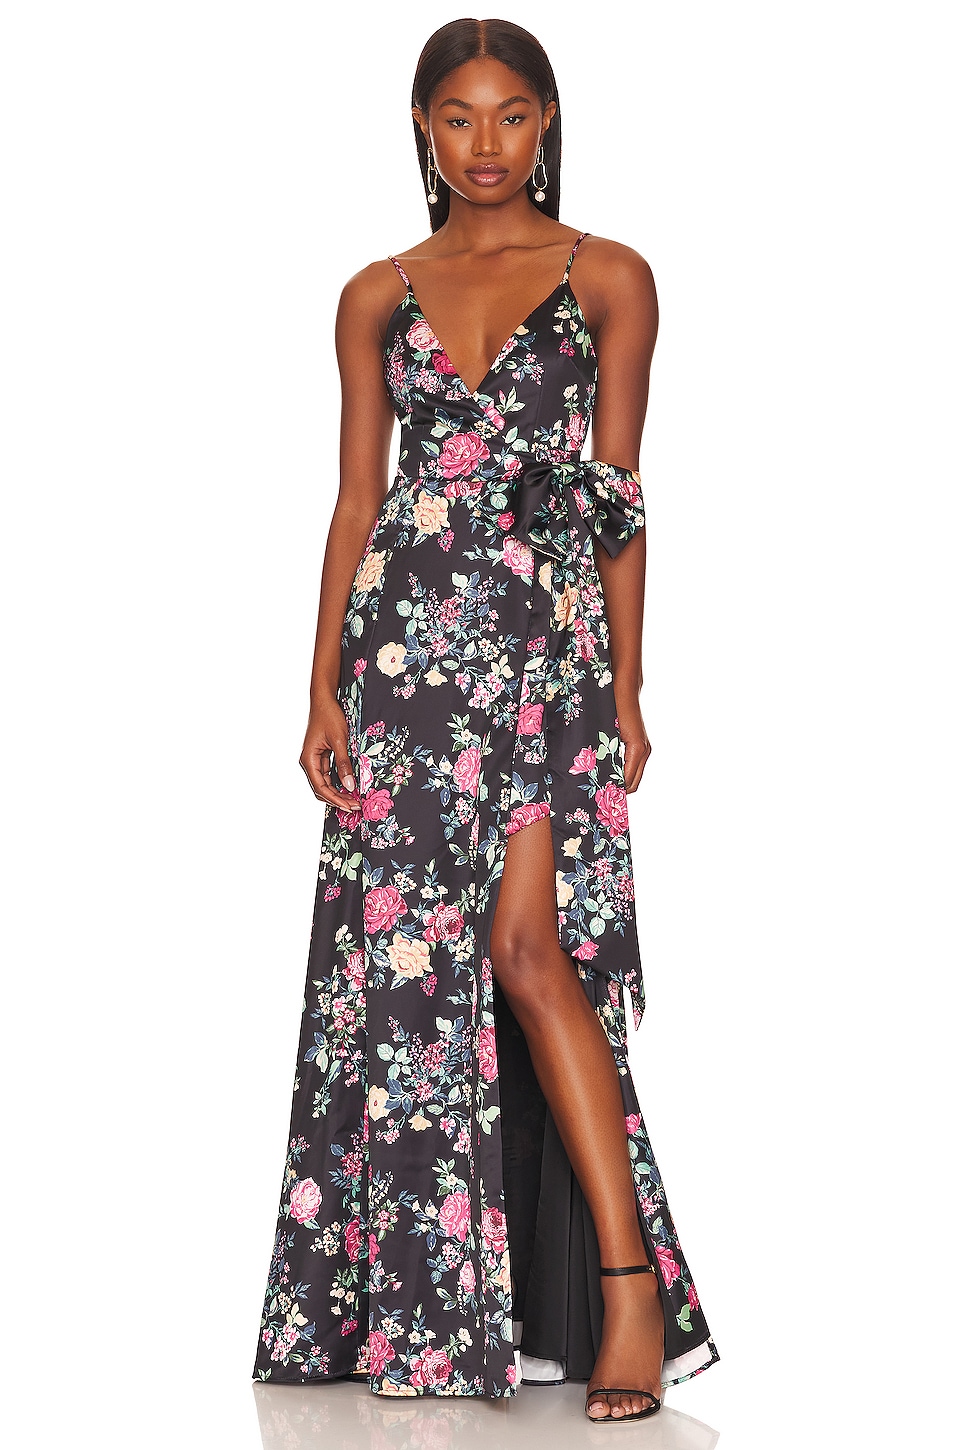 Lovers and Friends Arianna Gown in Climbing Floral